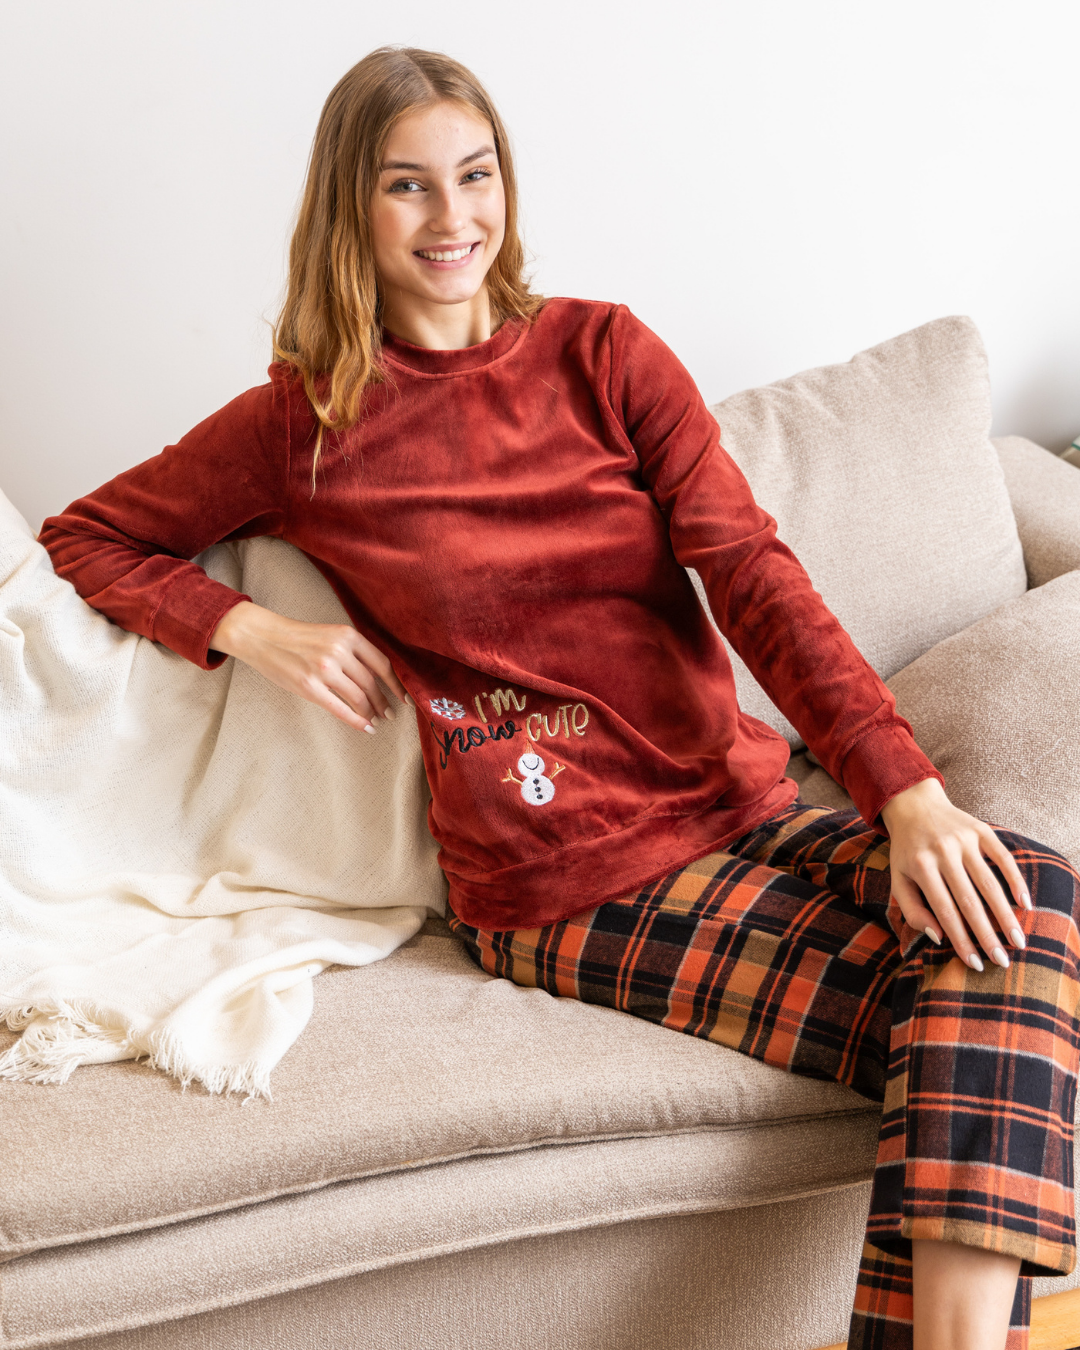 snow Women's pajamas, velvet, round neck, embroidered with check pants